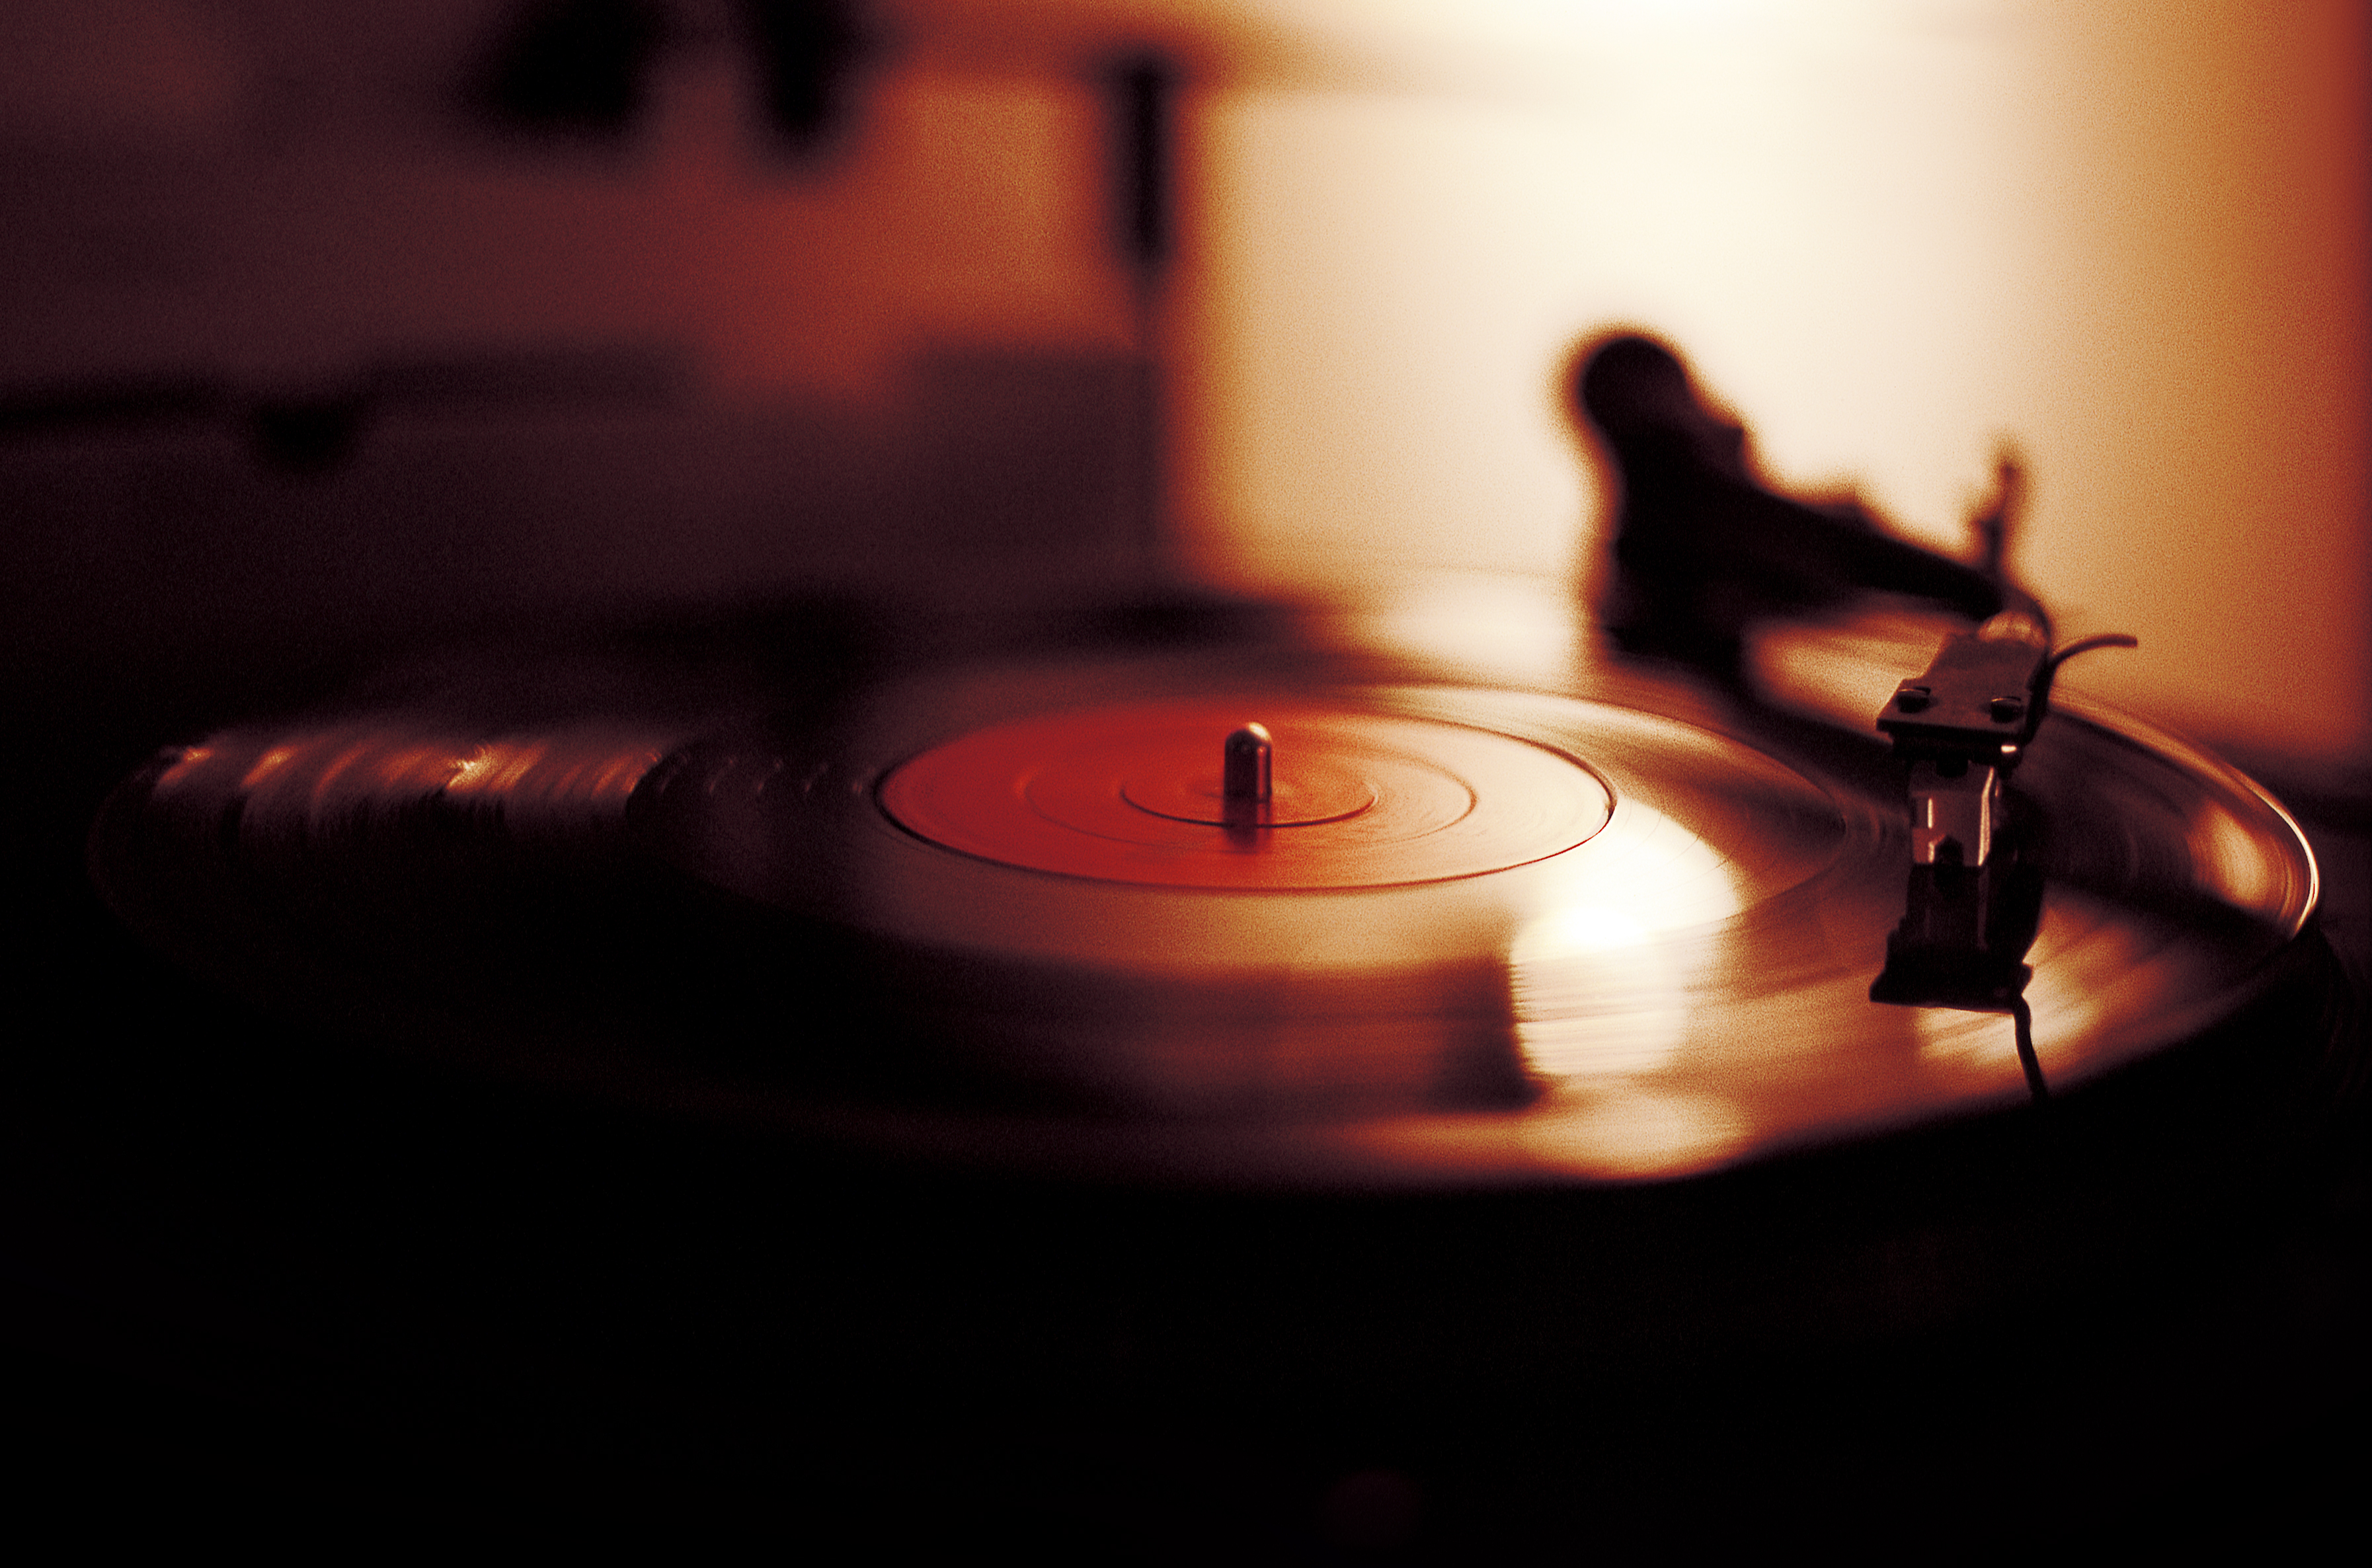 Vinyl playing on a record player 